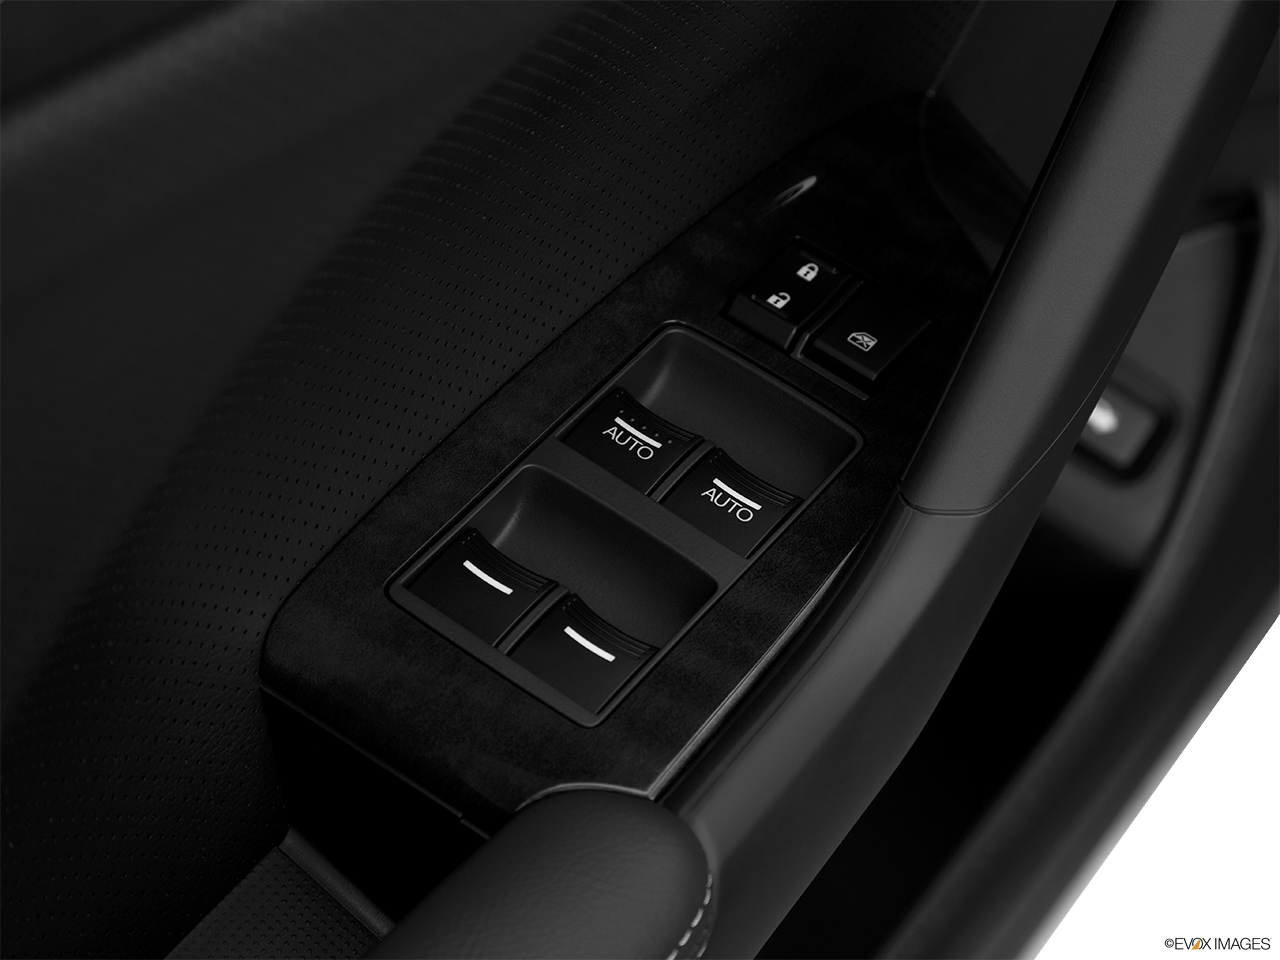 2014 Acura TSX 5-speed Automatic Driver's side inside window controls. 